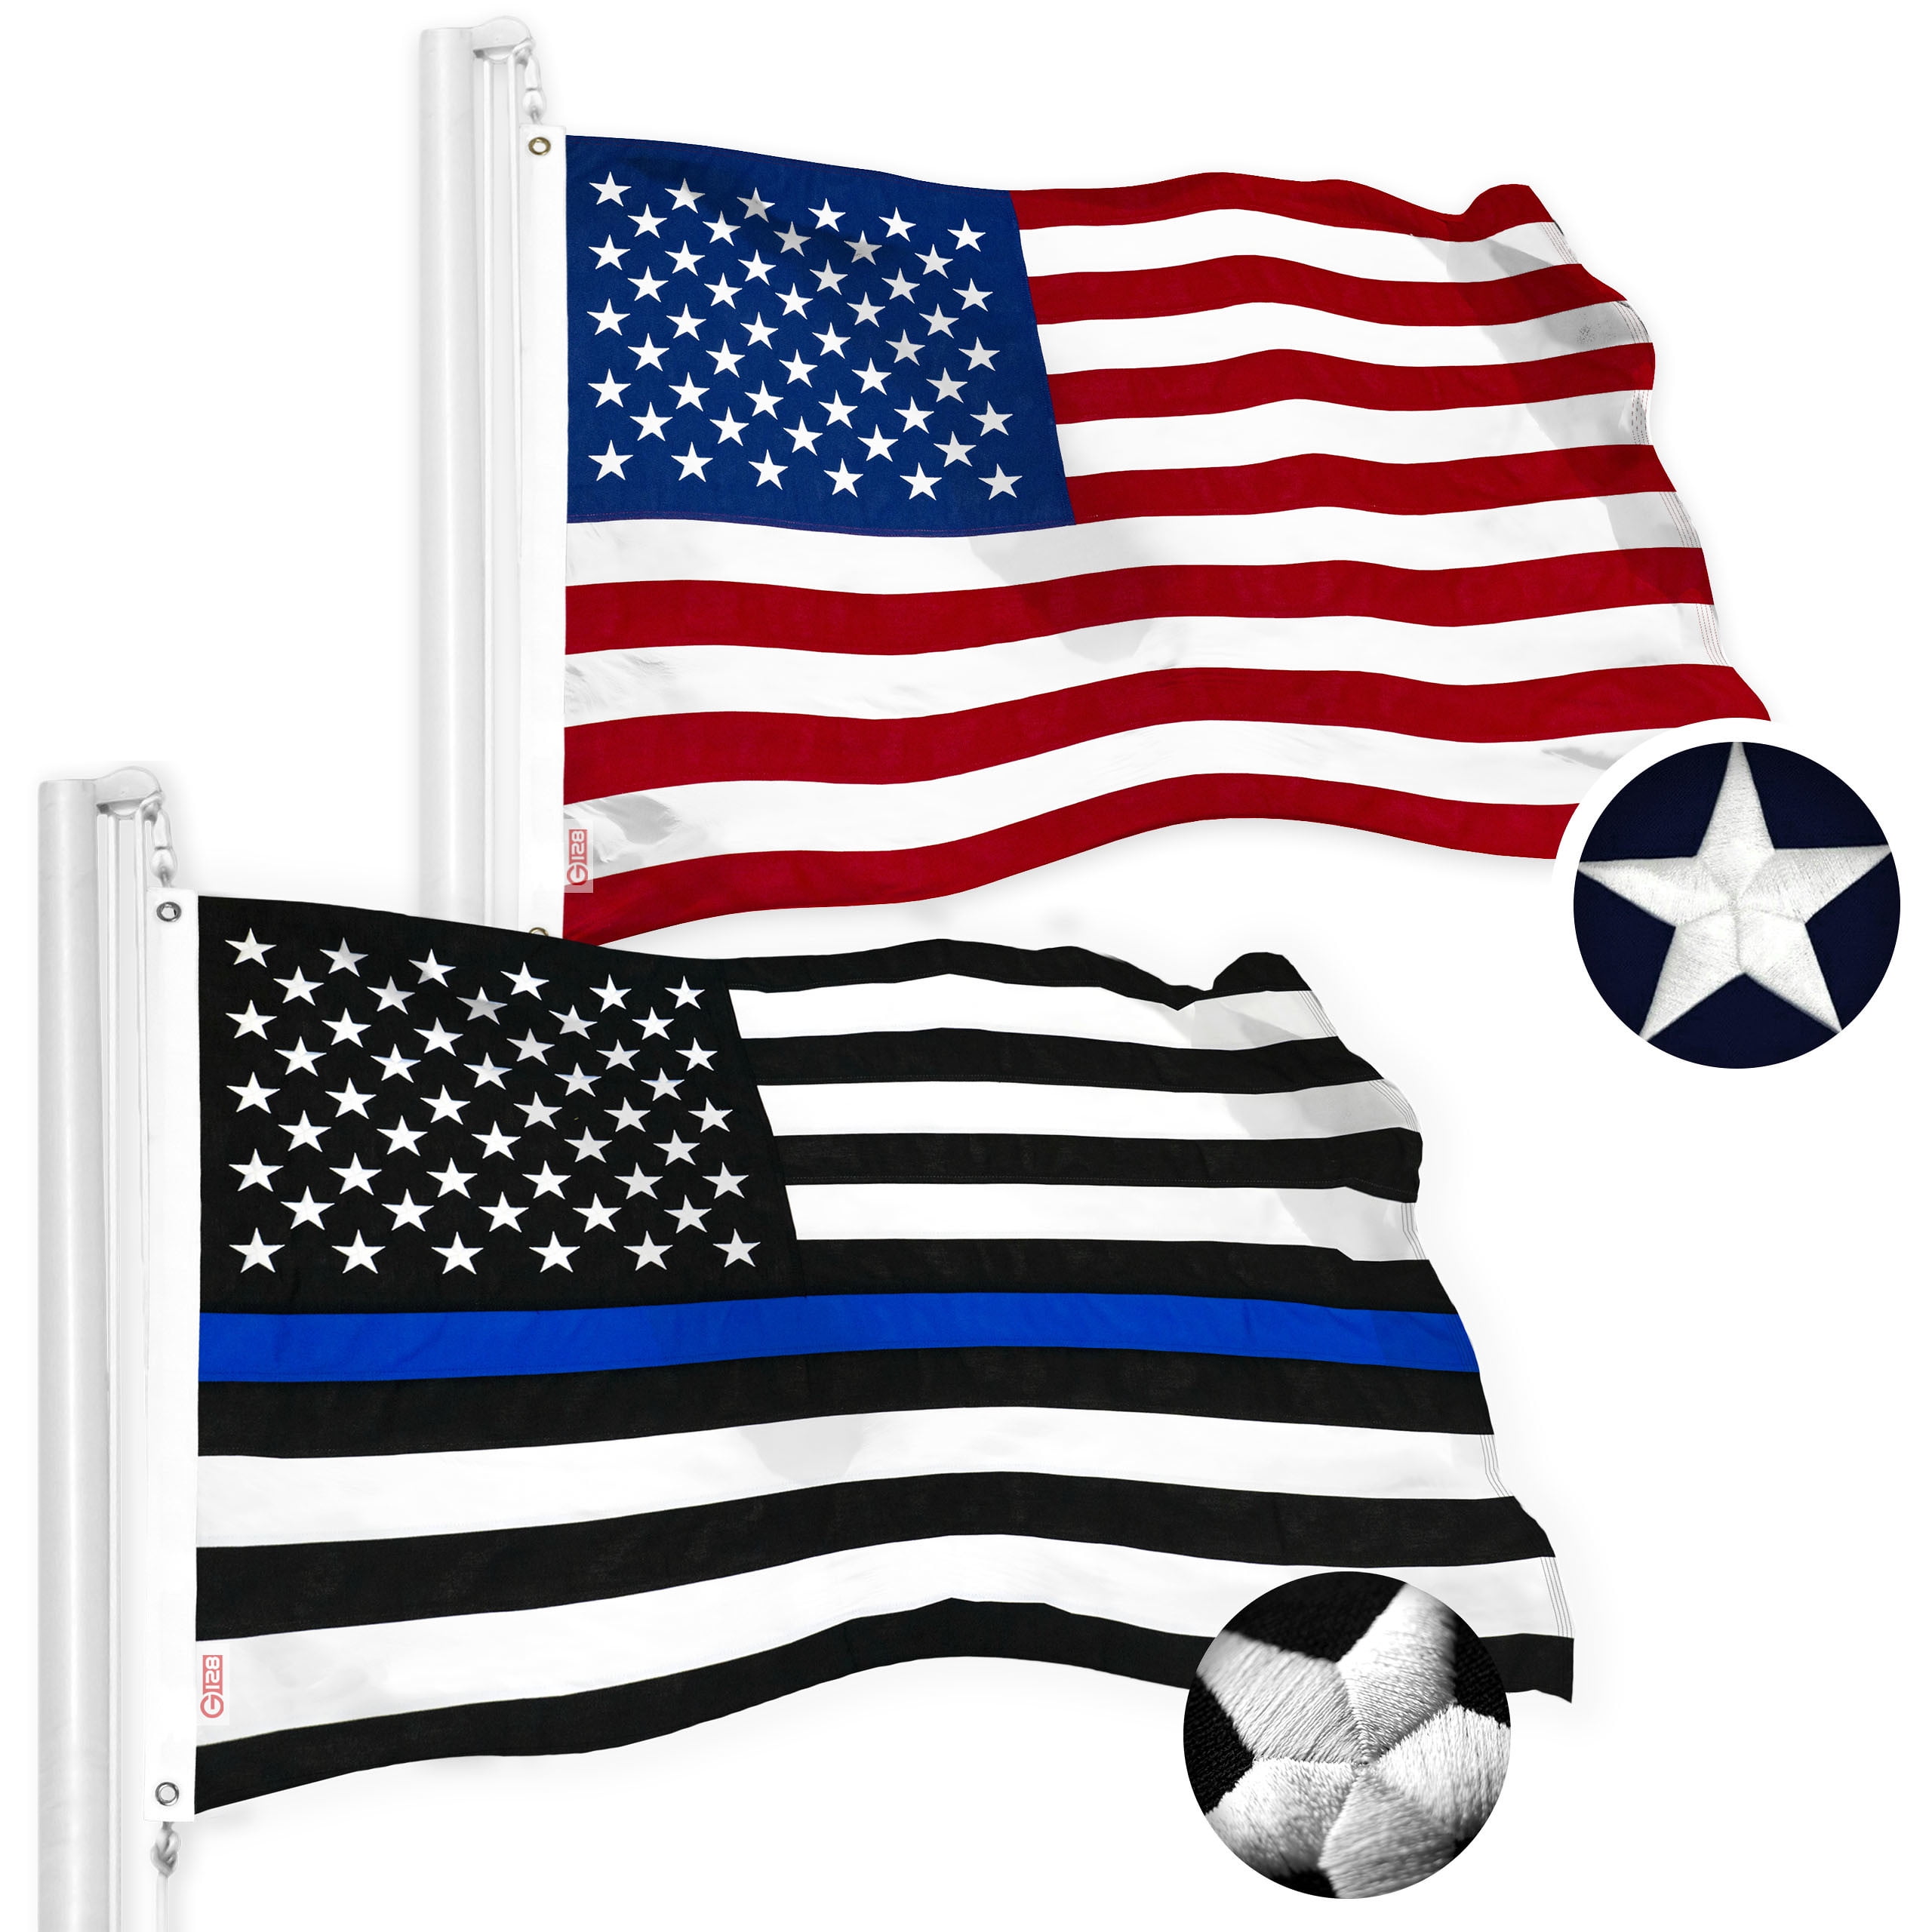 American Flag 2x3 Foot with Grommets 2 Pack Police Thin Blue Line and U.S 